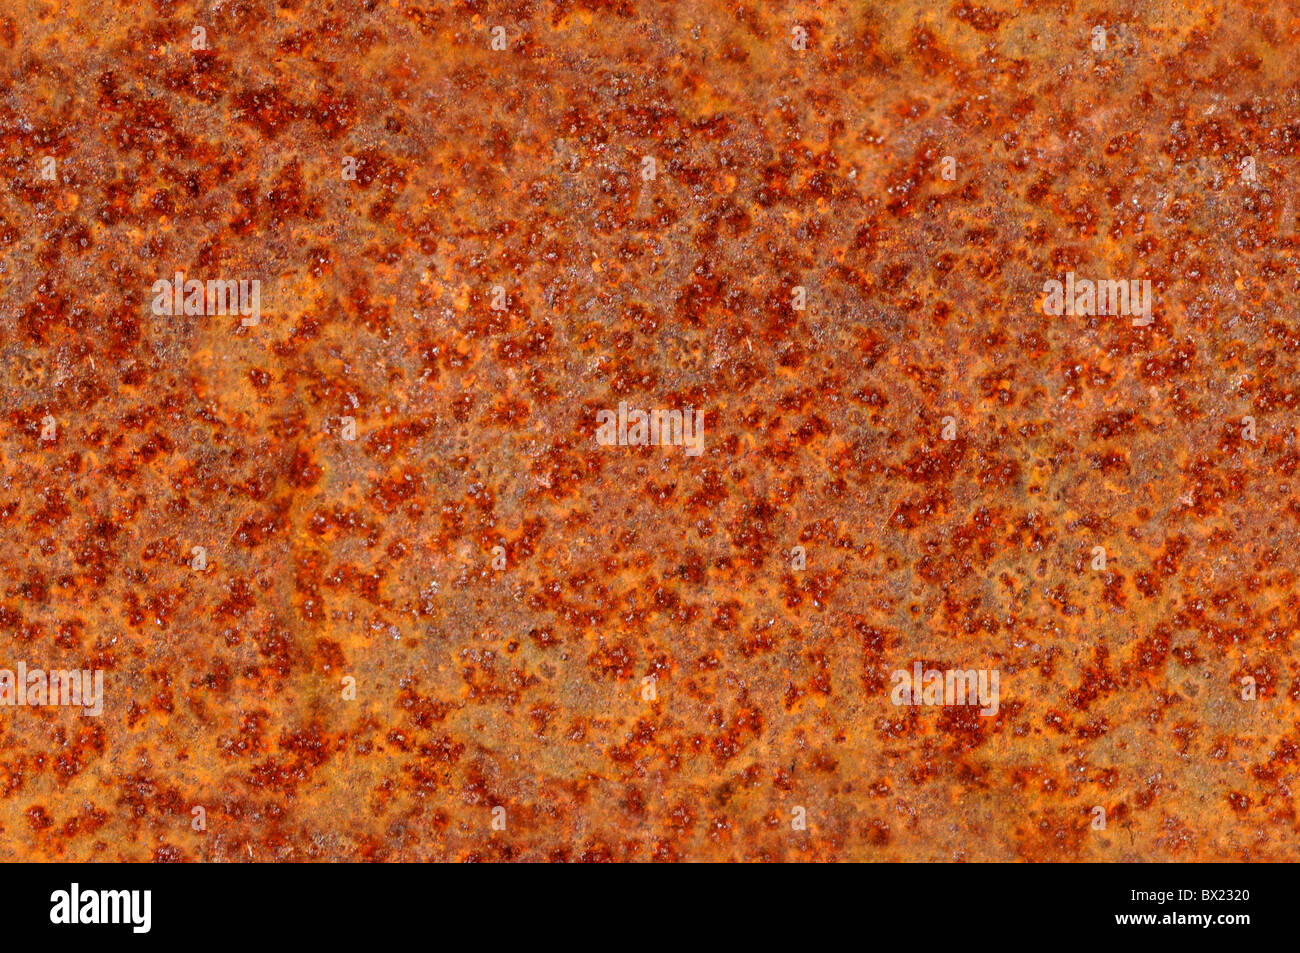 Rusted corroded metal surface seamlessly tileable, reddish orange in color. Stock Photo